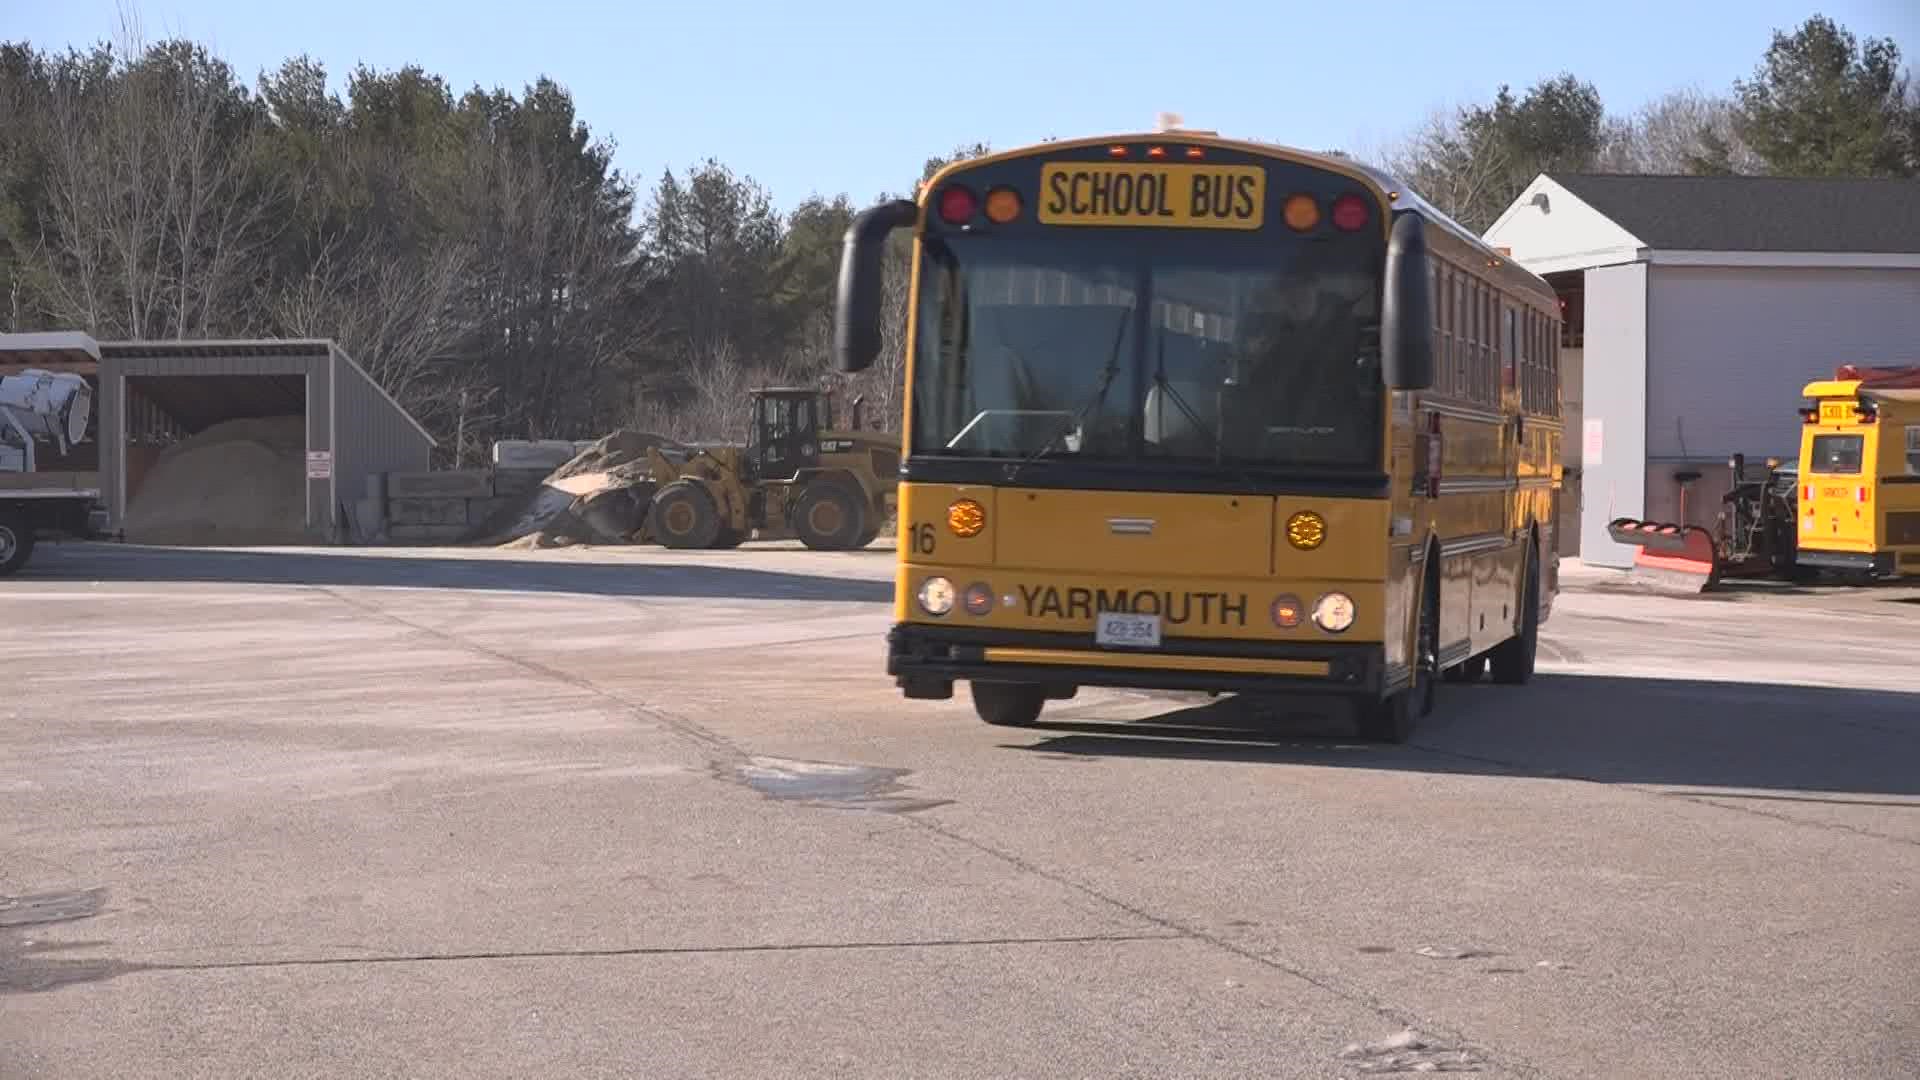 Jerry Jalbert saw a need for school bus drivers and decided to get his license in December.